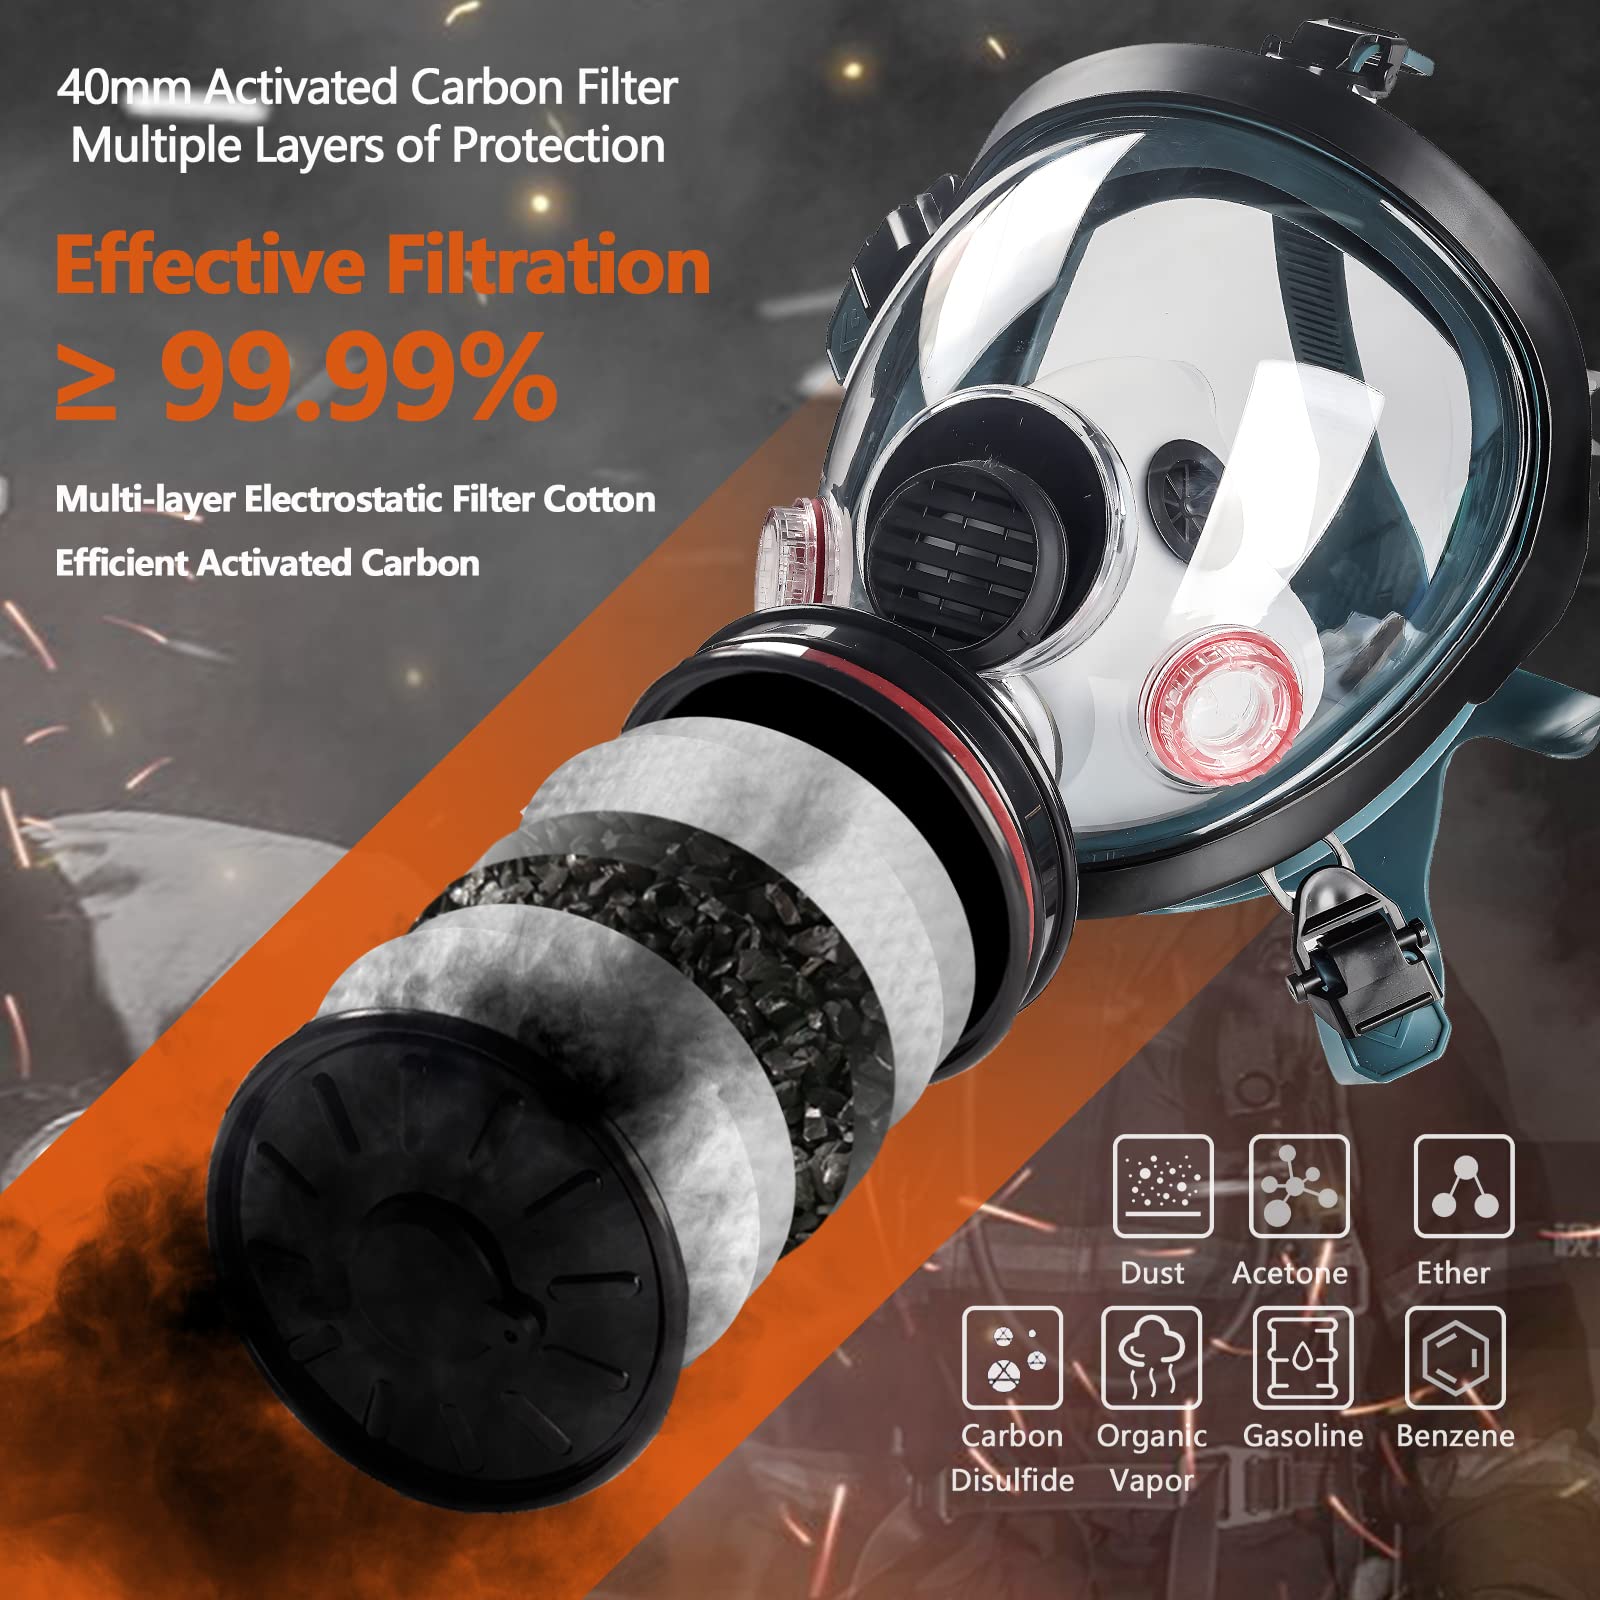 HANUU Gas Mask, Gas Masks Survival Nuclear and Chemical with 40mm Activated Carbon Filter, Tactical Full Face Respirator Mask for Gases, Dust, Vapors, Chemicals, Paint, Spray